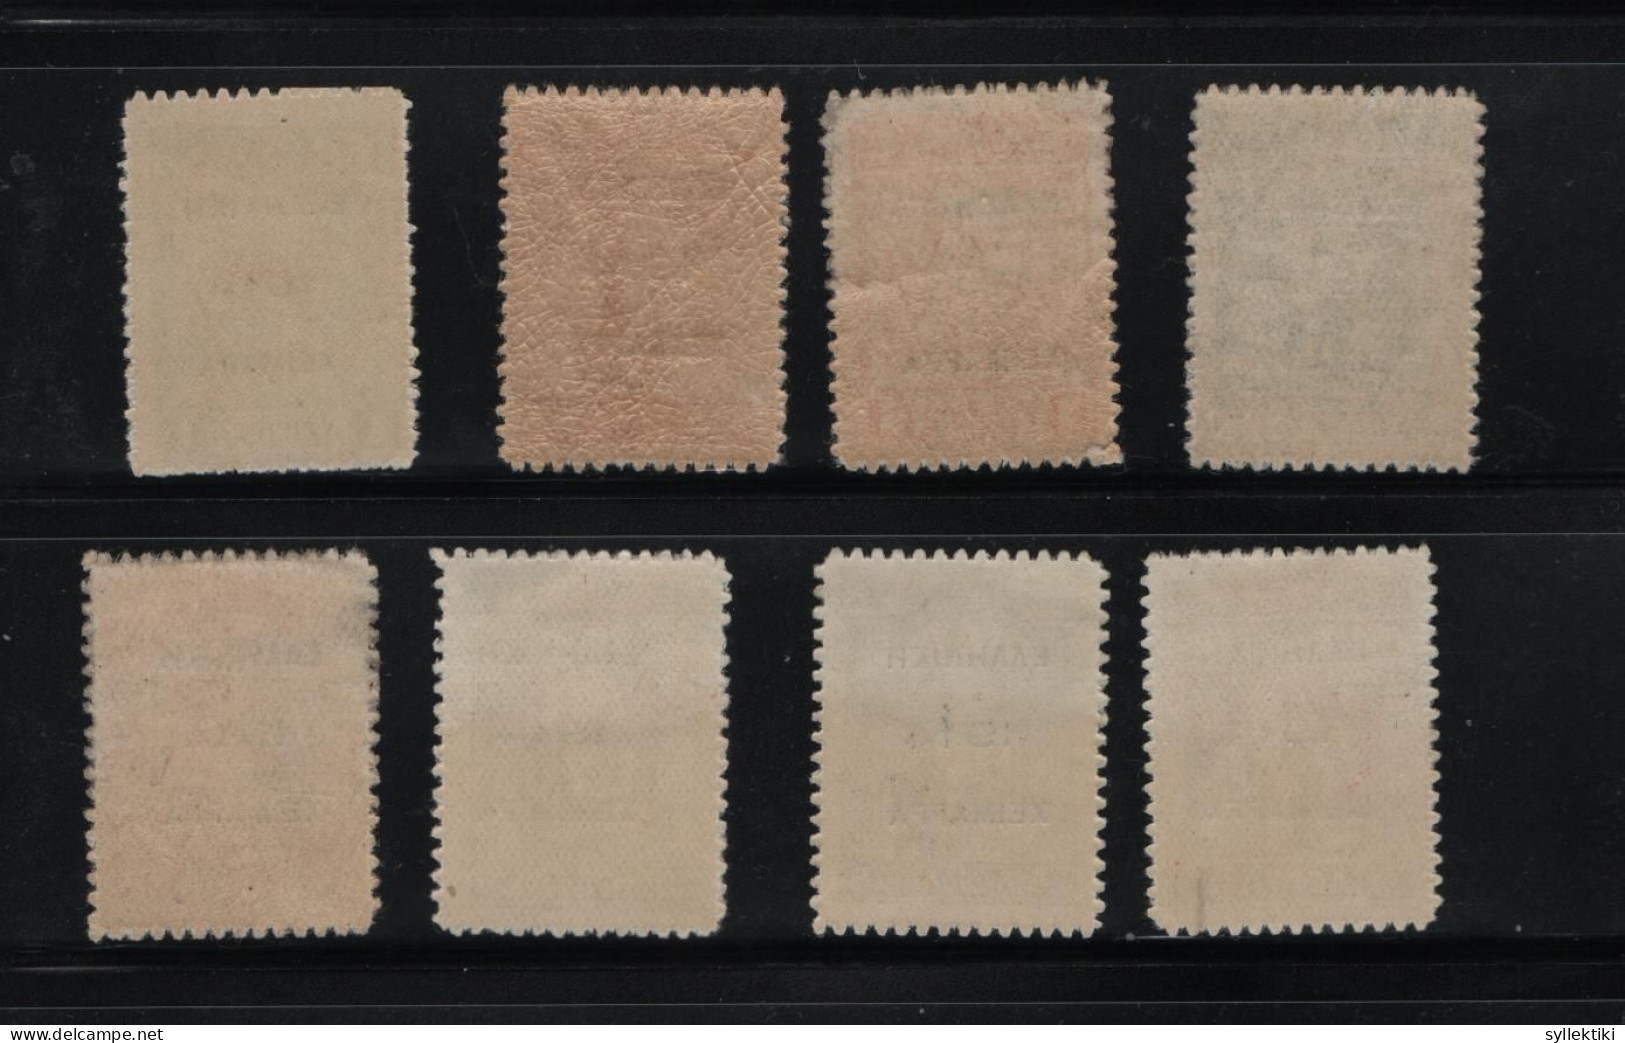 GREECE EPIRUS 1914 CHIMARRA ISSUE COMPLETE SET MH STAMPS    HELLAS No 68 - 75 AND VALUE EURO 1300.00 - North Epirus